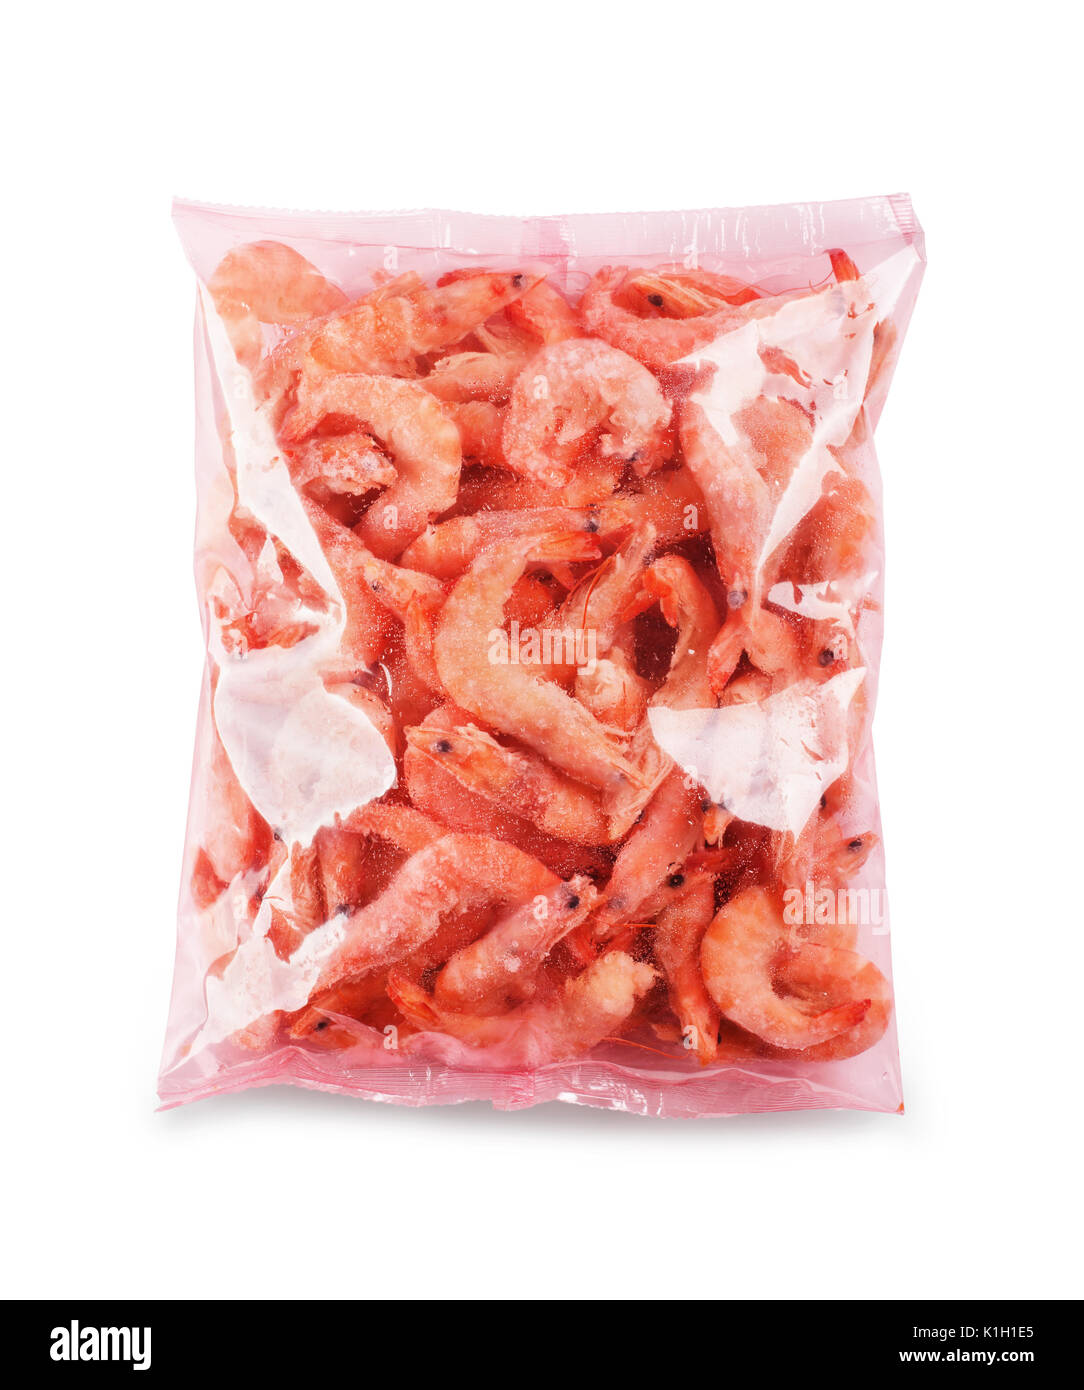 Frozen shrimp or prawn in plastic package isolated on a white background  Stock Photo - Alamy